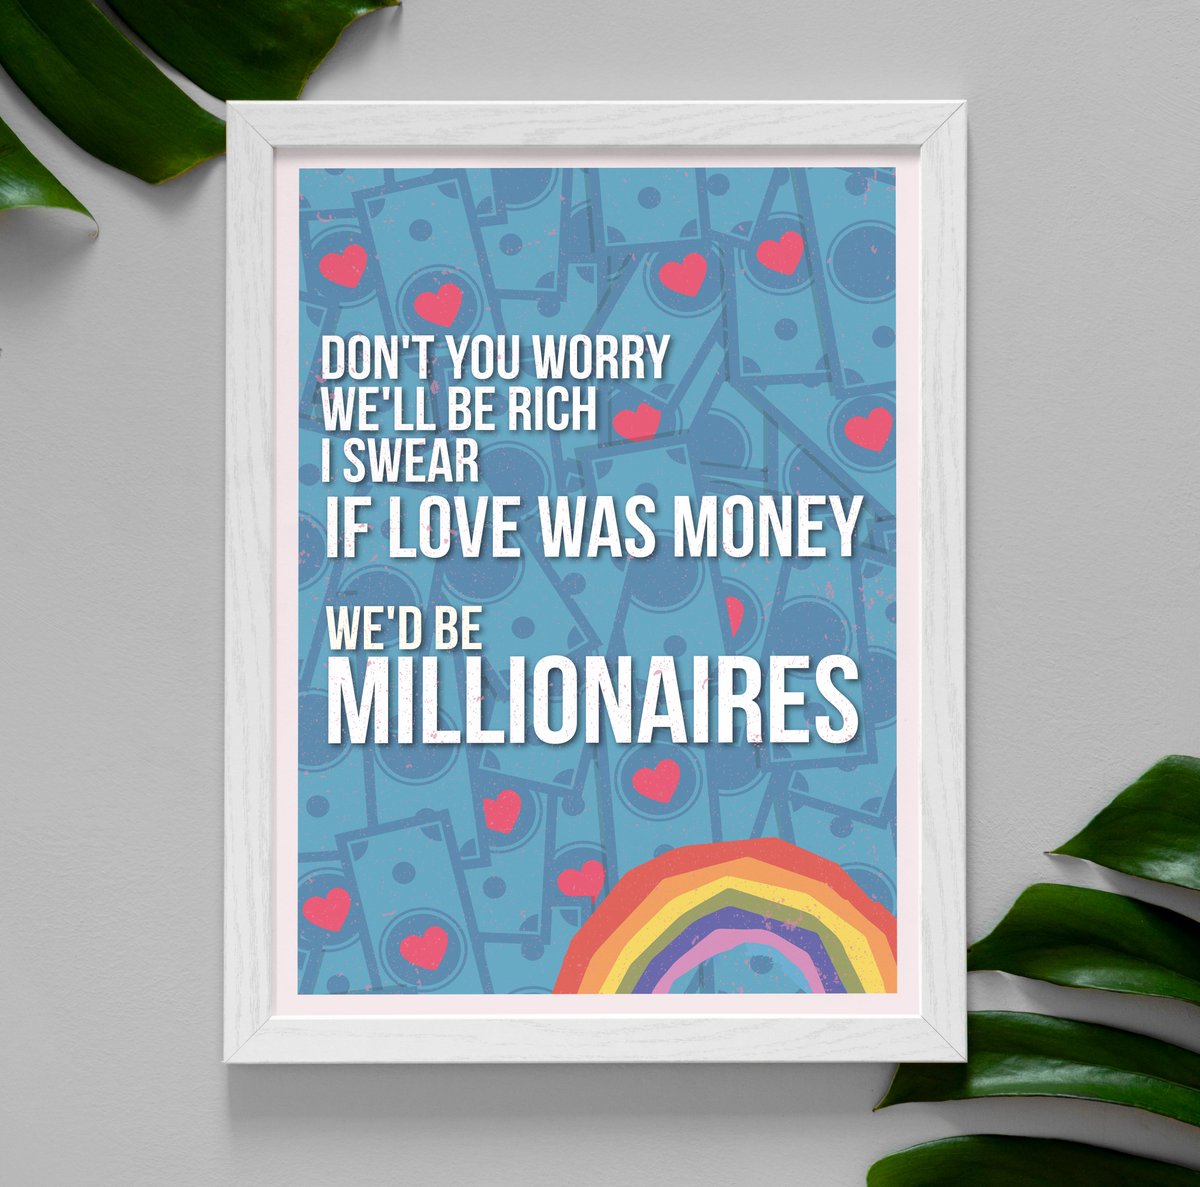 💥New design today! 💥 Awesome The Snuts tune Millionaire ❤️ A4 prints - 1 for £10 (including p&p) Or a selection of 3 other designs for £20 (including p&p) View other designs here.. ⬇️⬇️⬇️ russellpurdy.wixsite.com/brands-in-the-…… DM for orders RT welcome 🙏 #thesnuts